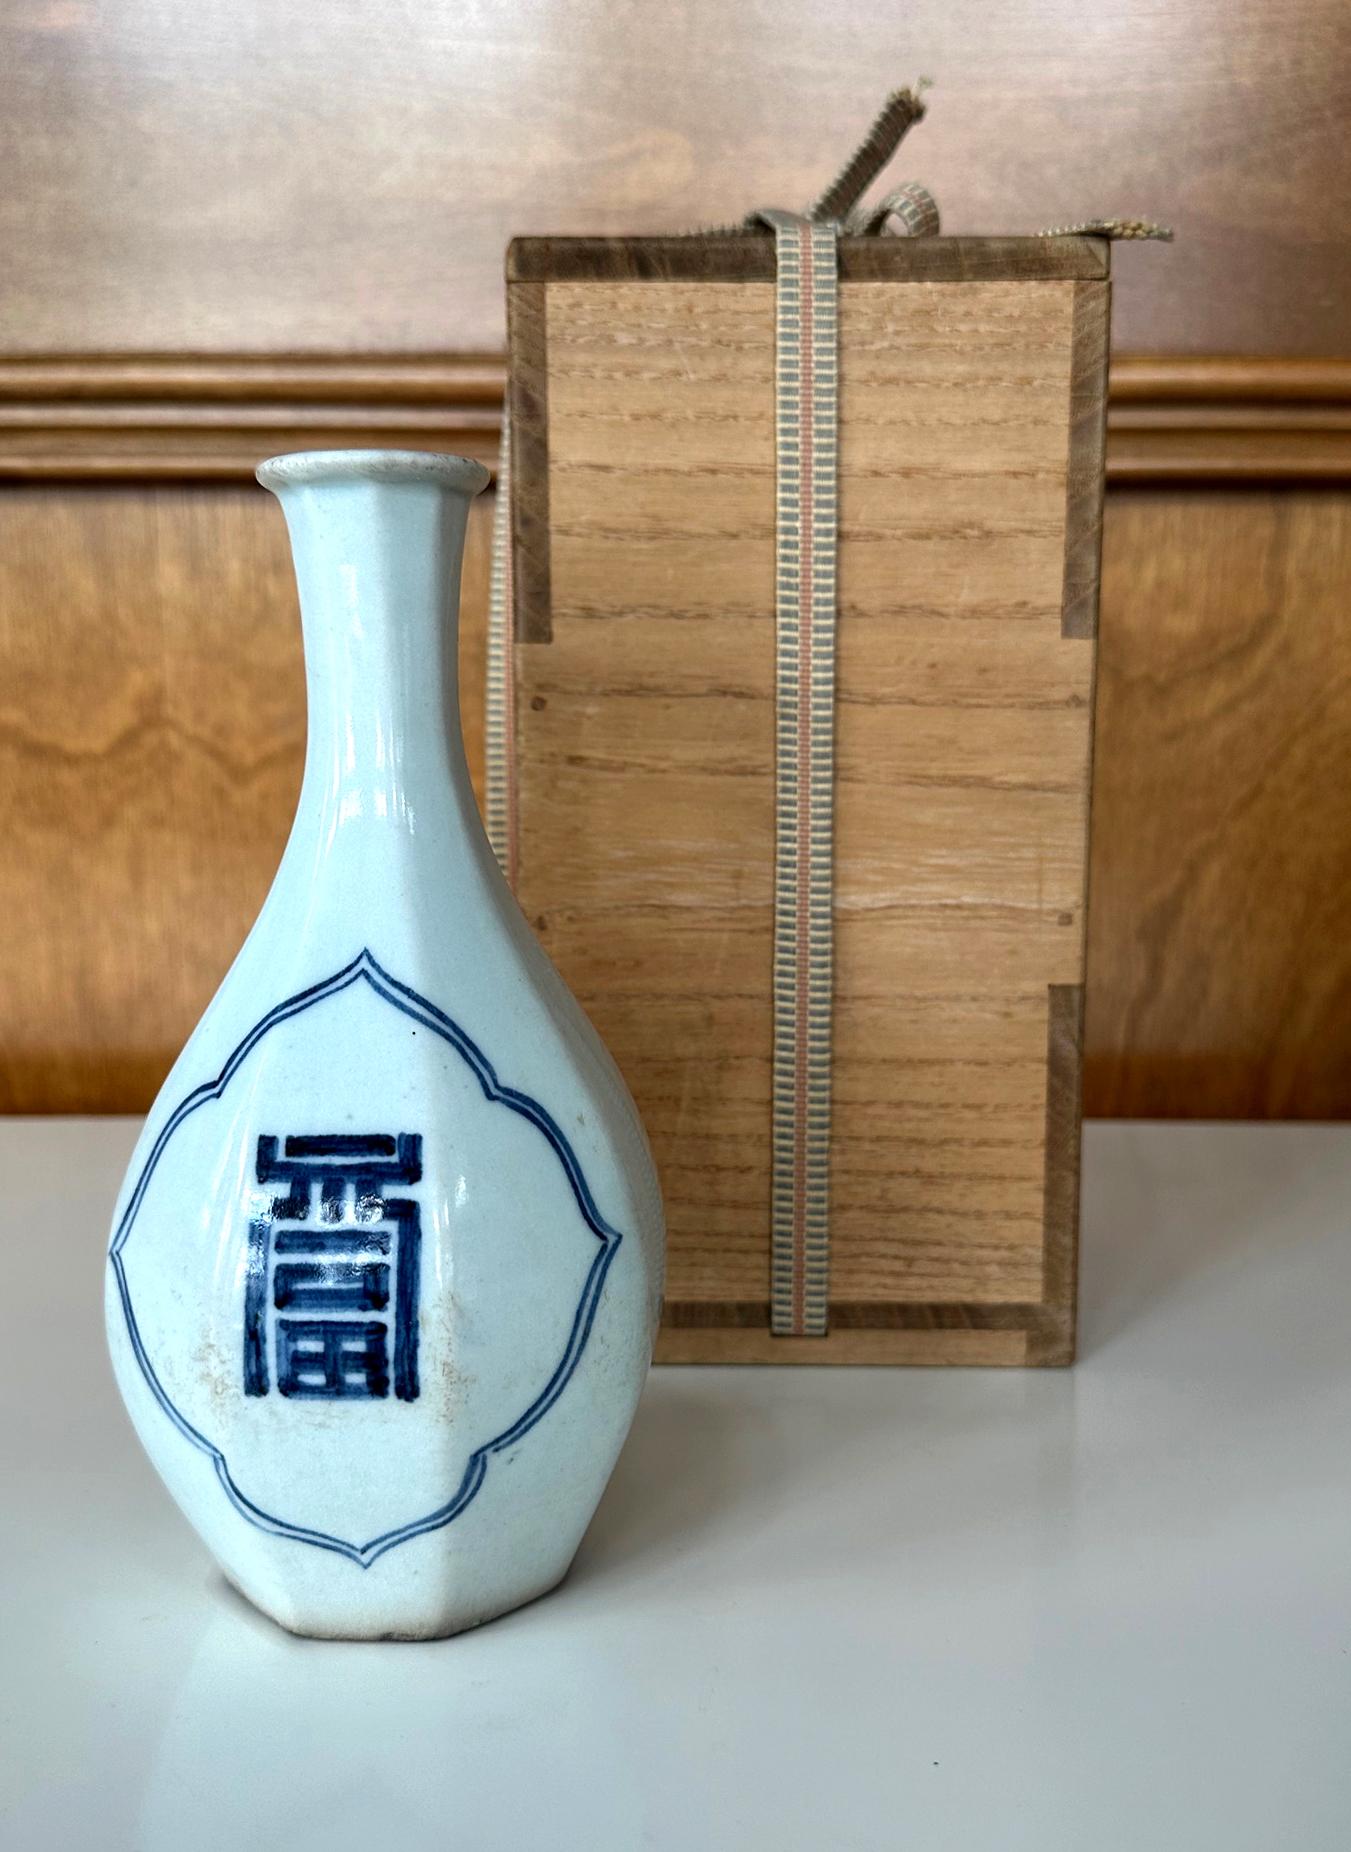 A Korean blue and white long neck vase in bottle form with octagonal faceted surface from Joseon Dynasty (19th century). The elegant vase is covered in a white glaze with a tint of celadon blue. It prominently features two large archaic-form Hanja